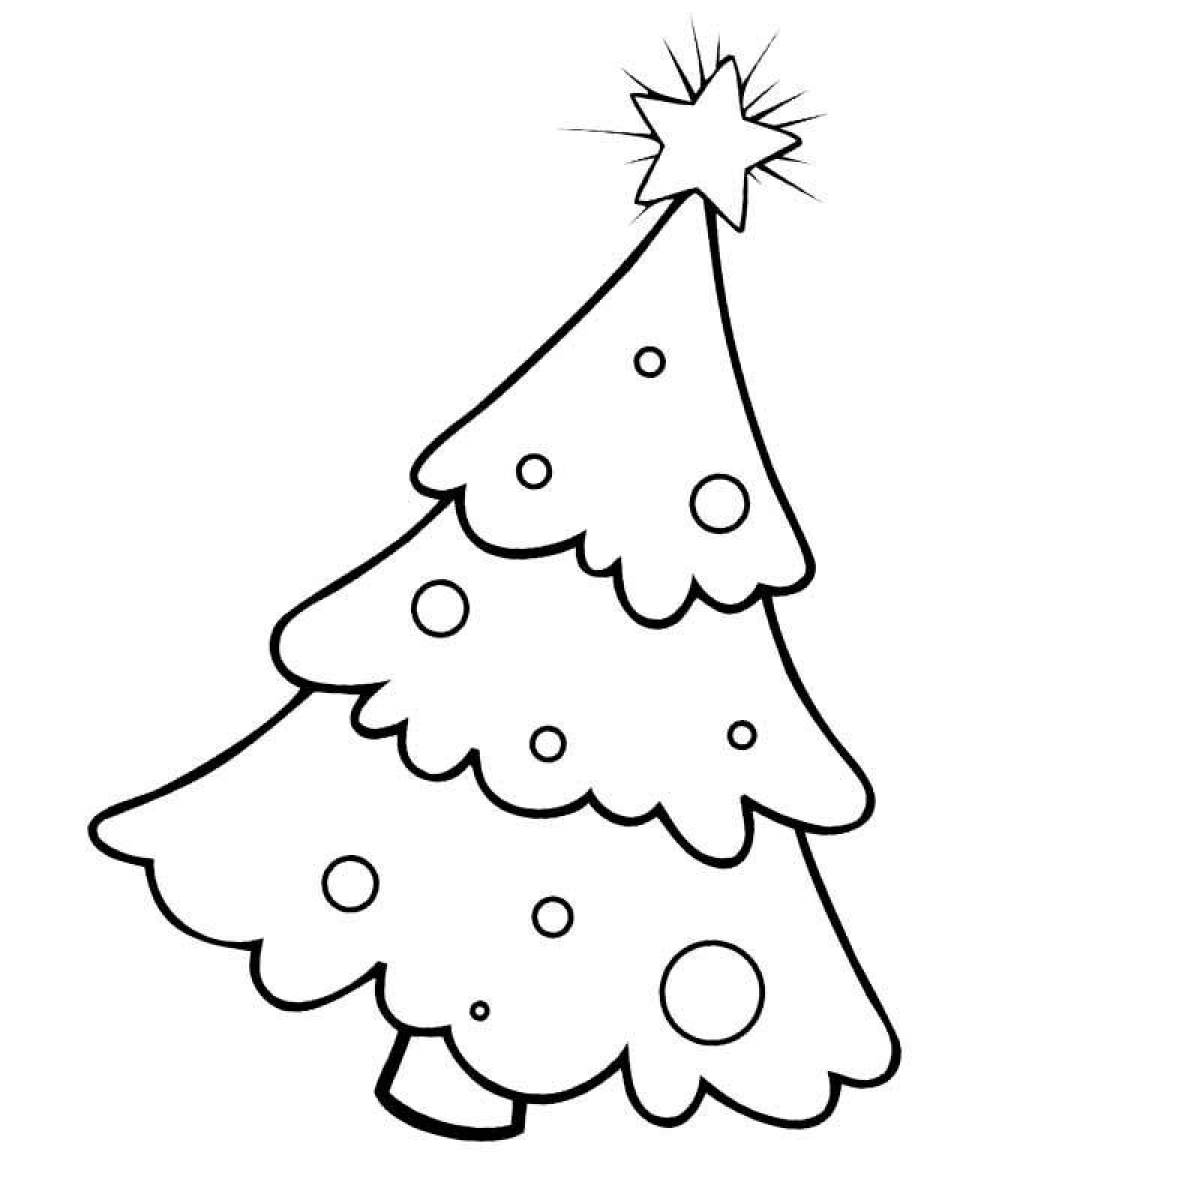 Sparkling Christmas tree coloring book for 3-4 year olds